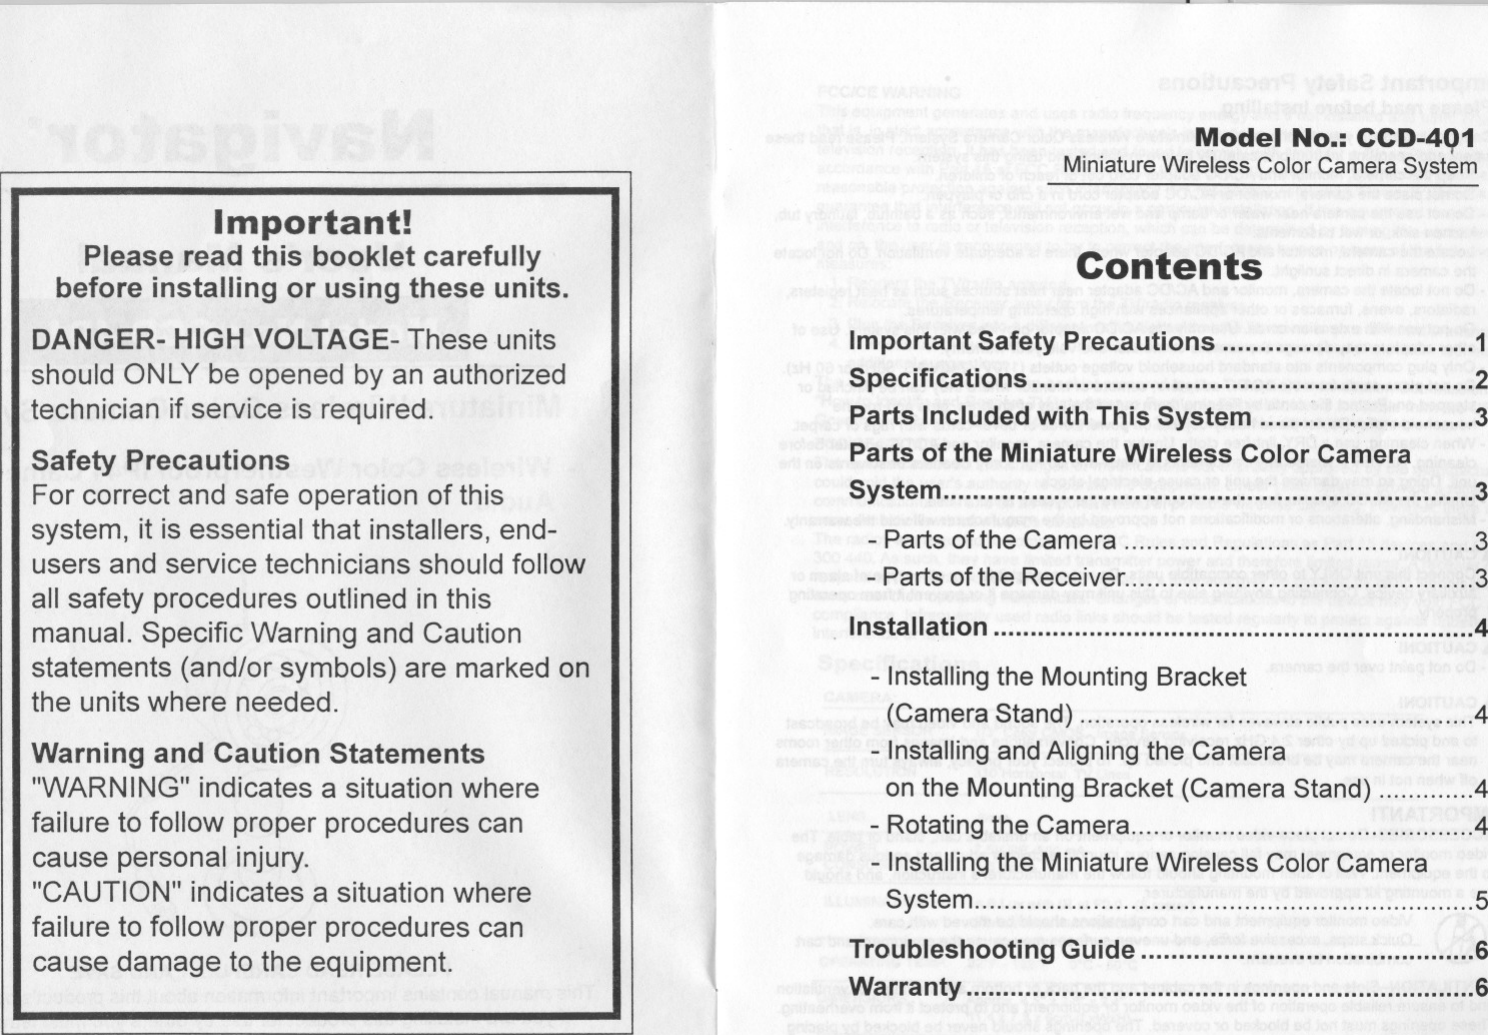 Model No.: CCD-4Q1Miniature Wireless Color Camera SystemImportant!Please read this booklet carefullybefore installing or using these units.DANGER-HIGHVOLTAGE-These unitsshould ONLY be opened by an authorizedtechnician if service is required.ContentsSafety PrecautionsFor correct and safe operation of thissystem, it is essential that installers, end-users and service technicians should followall safety procedures outlined in thismanual. Specific Warning and Cautionstatements (and/or symbols) are marked onthe units where needed.Warning and Caution Statements&quot;WARNING&quot; indicates a situation wherefailure to follow proper procedures cancause personal injury.&quot;CAUTION&quot; indicates a situation wherefailure to follow proper procedures cancause damage to the equipment.Important Safety Precautions 1Specifications ..2Parts IncludedwithThis System ~.~ 3Parts of the Miniature Wireless Color CameraSystem :...... ..3- Parts ofthe Camera 3- Parts ofthe Receiver 3. Installation 4- Installing the Mounting Bracket(Camera Stand) 4- Installing and Aligningthe Cameraon the Mounting Bracket (Camera Stand) 4-Rotating the Camera 4-Installing the Miniature Wireless Color CameraSystem 5Troubleshooti n9 Guide 6Warranty 6